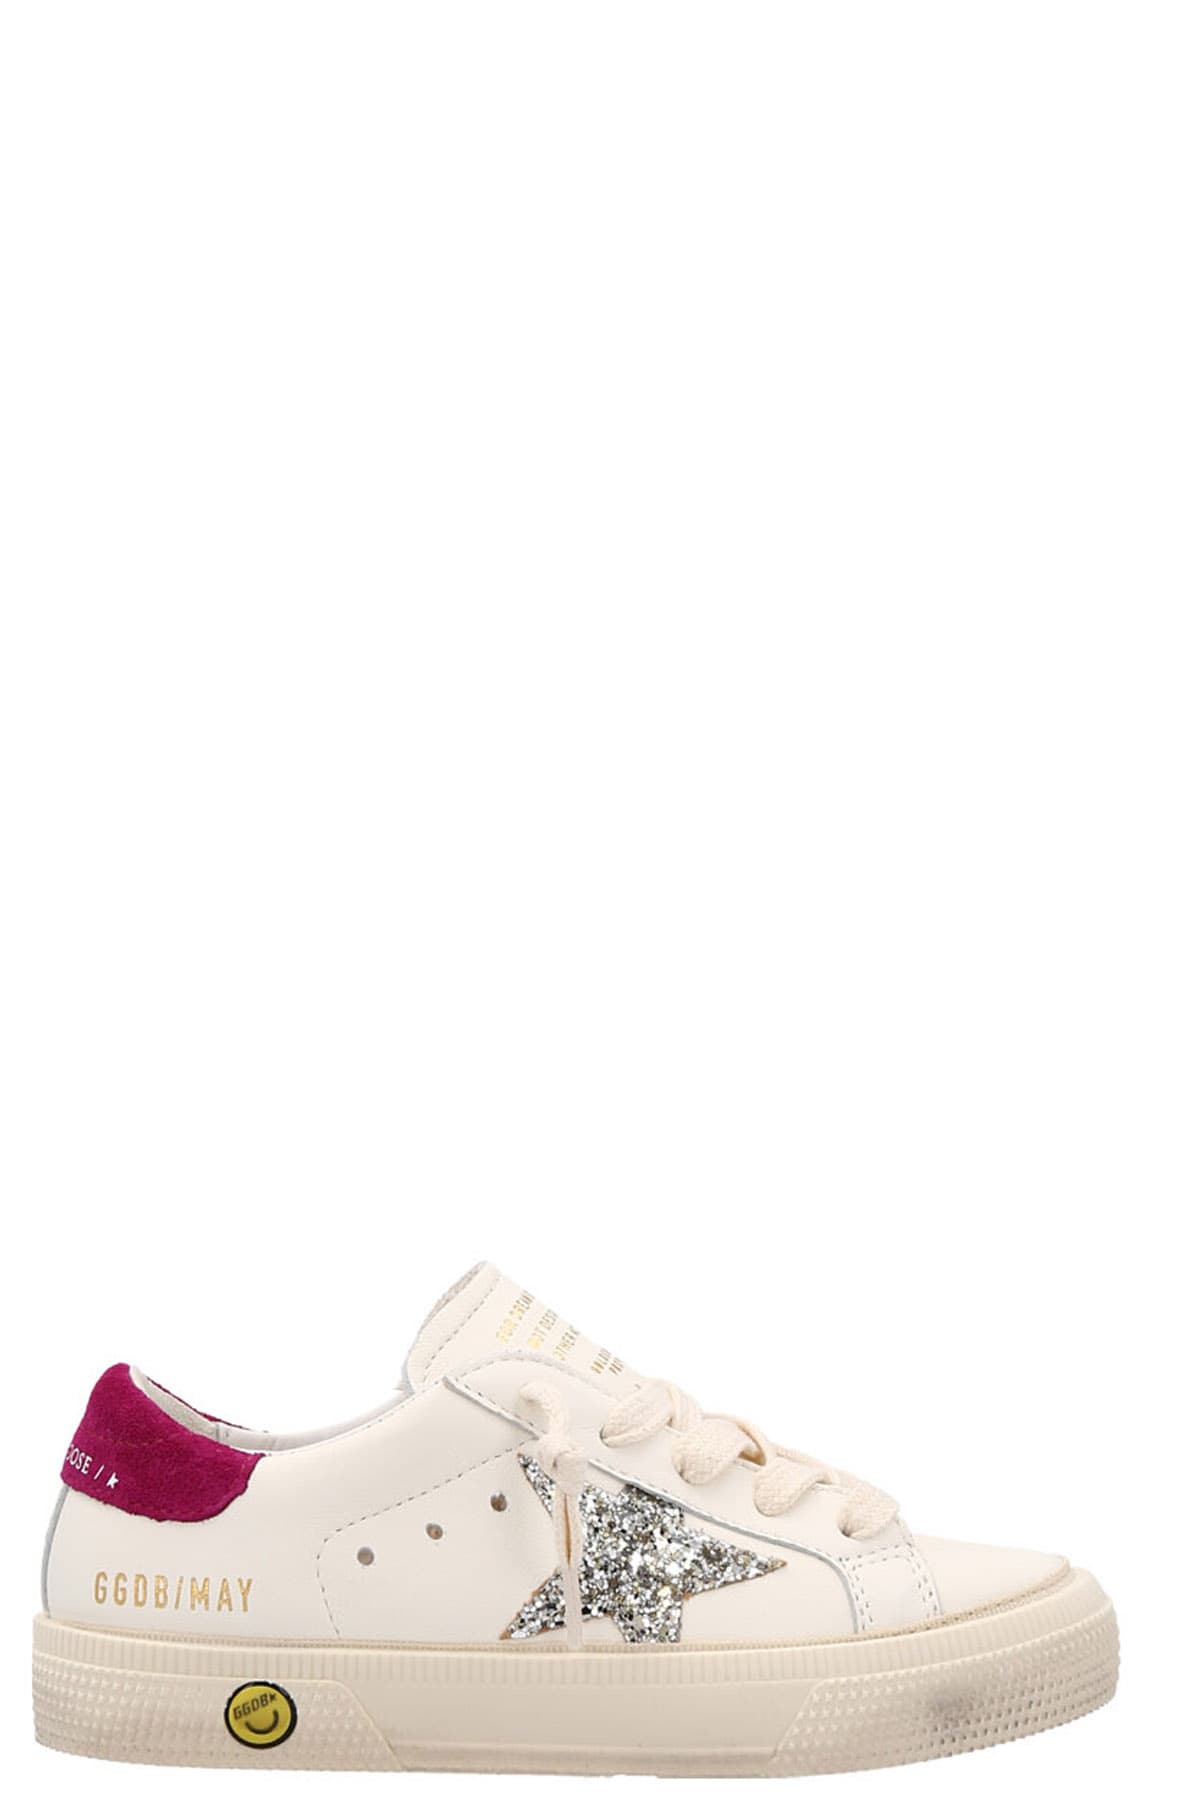 Golden Goose Kids' May Sneakers In White